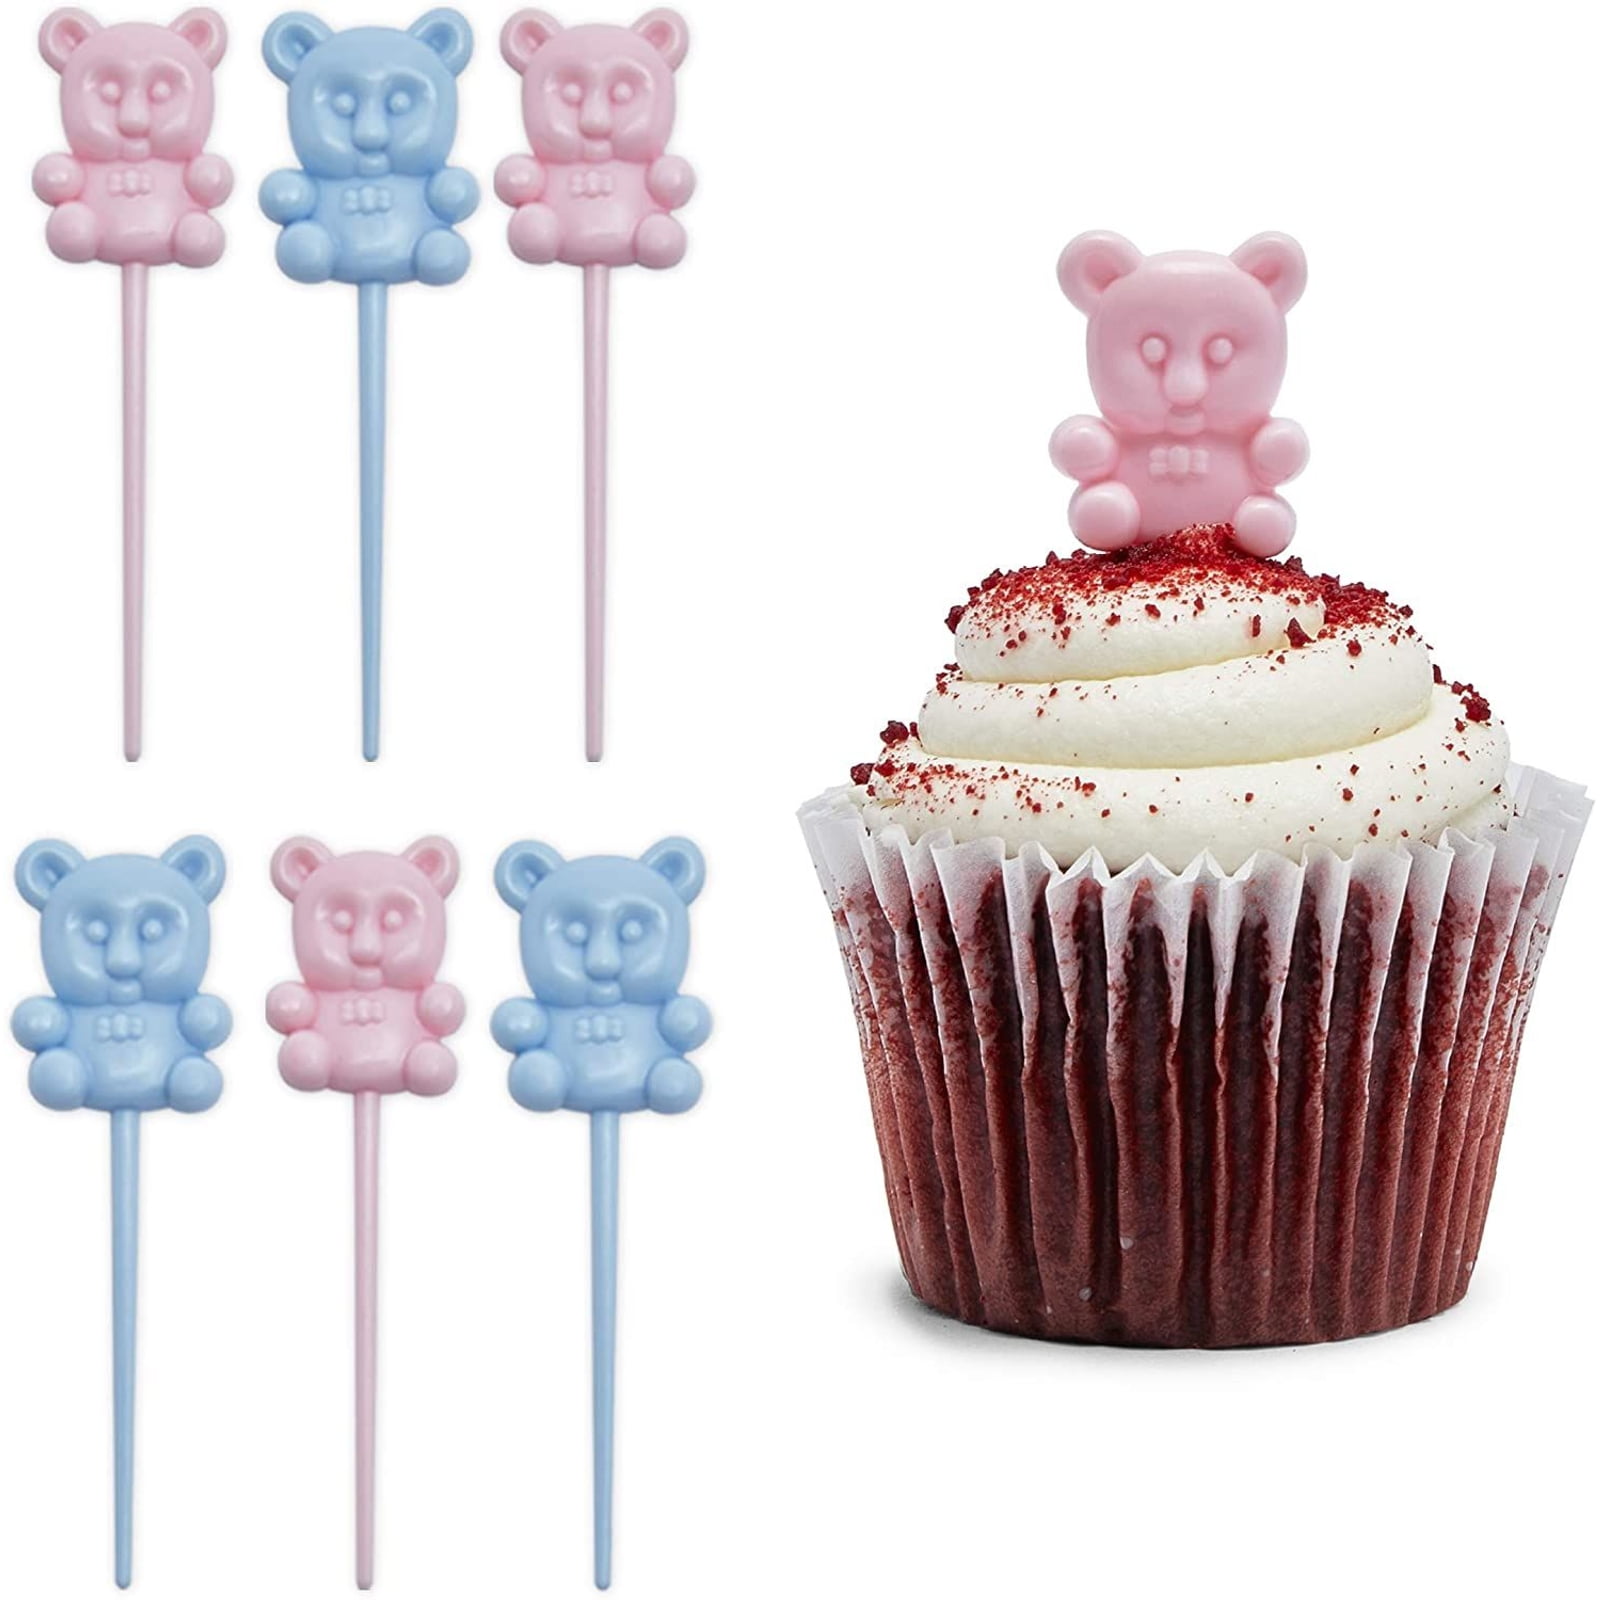 12 Teddy Bear Cupcake Toppers Tea Party Cake Baby Shower Birthday Gender Neutral